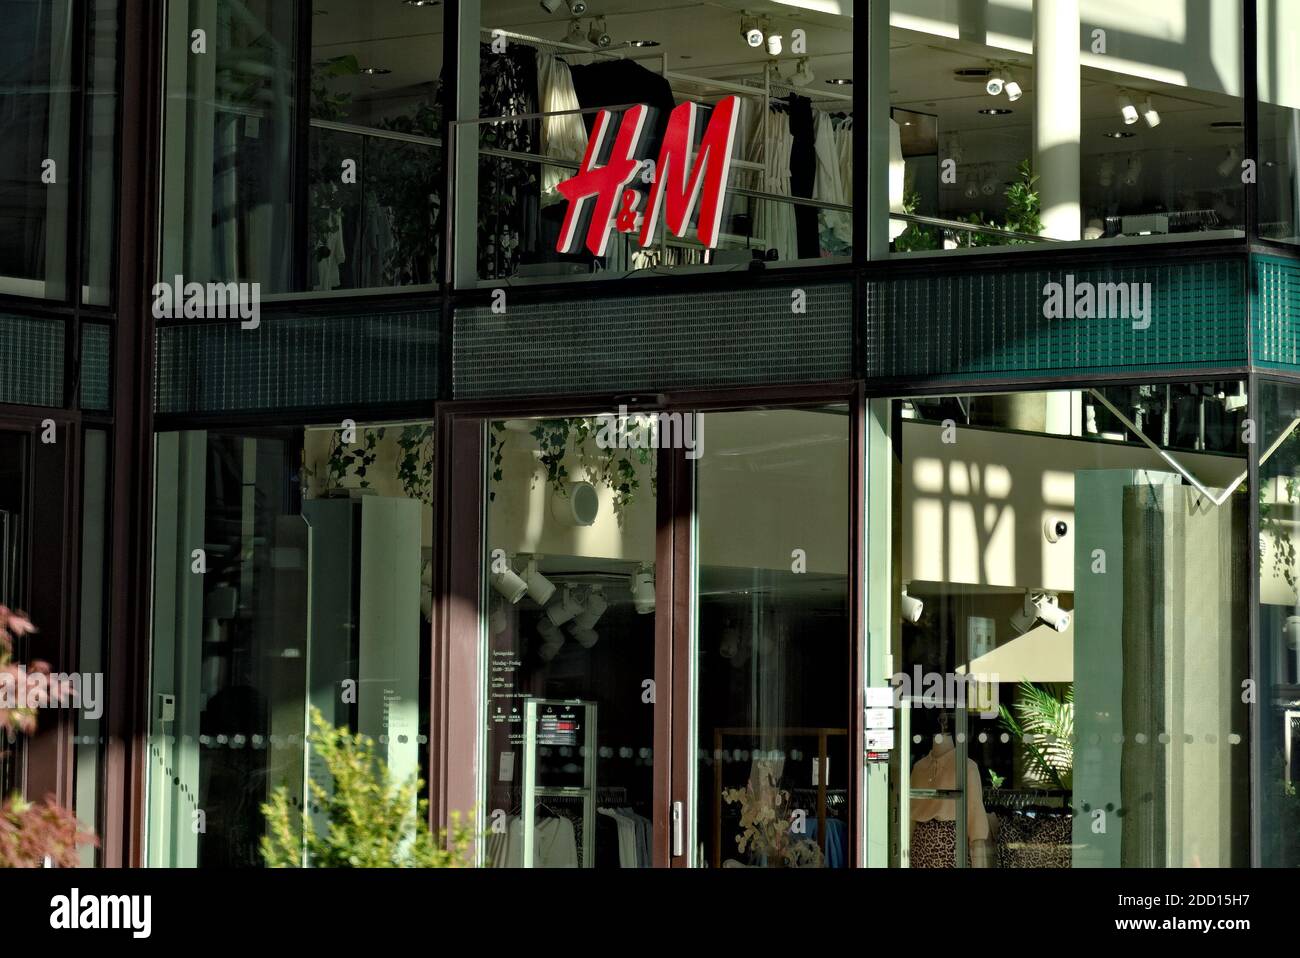 Oslo, Norway - Aug. 29th 2020: HM clothing brand head office in Oslo Stock  Photo - Alamy